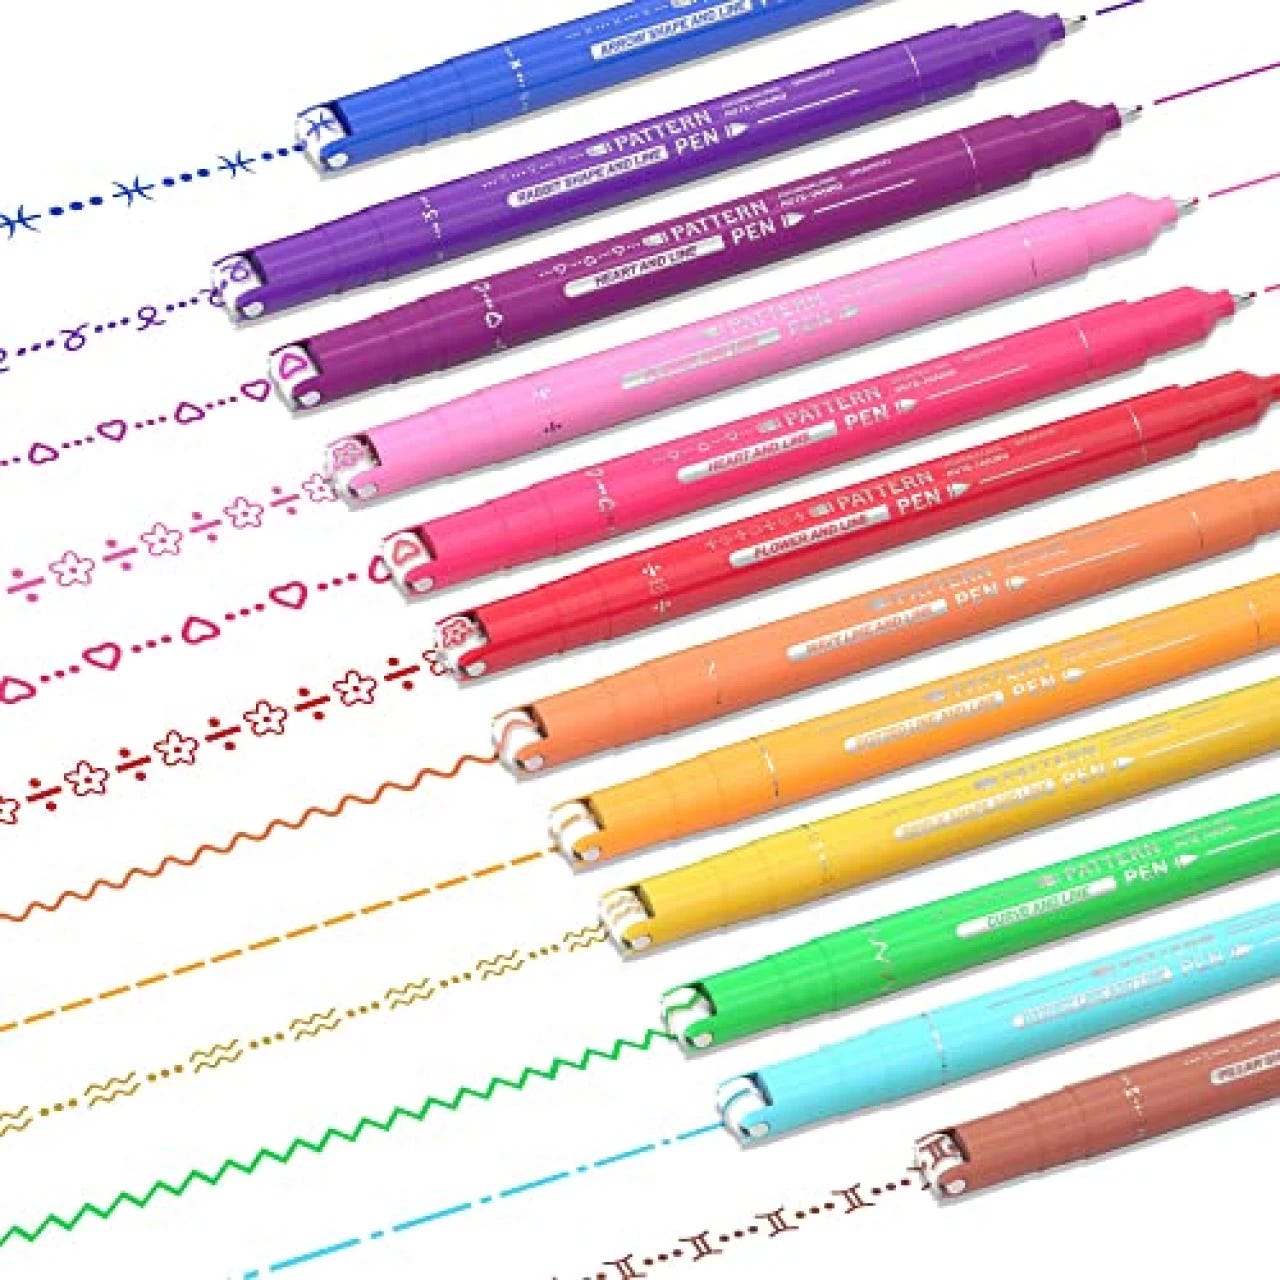 2023 Curve Highlighter Pens: Best for Journaling and Note Taking, by Emma, Nov, 2023